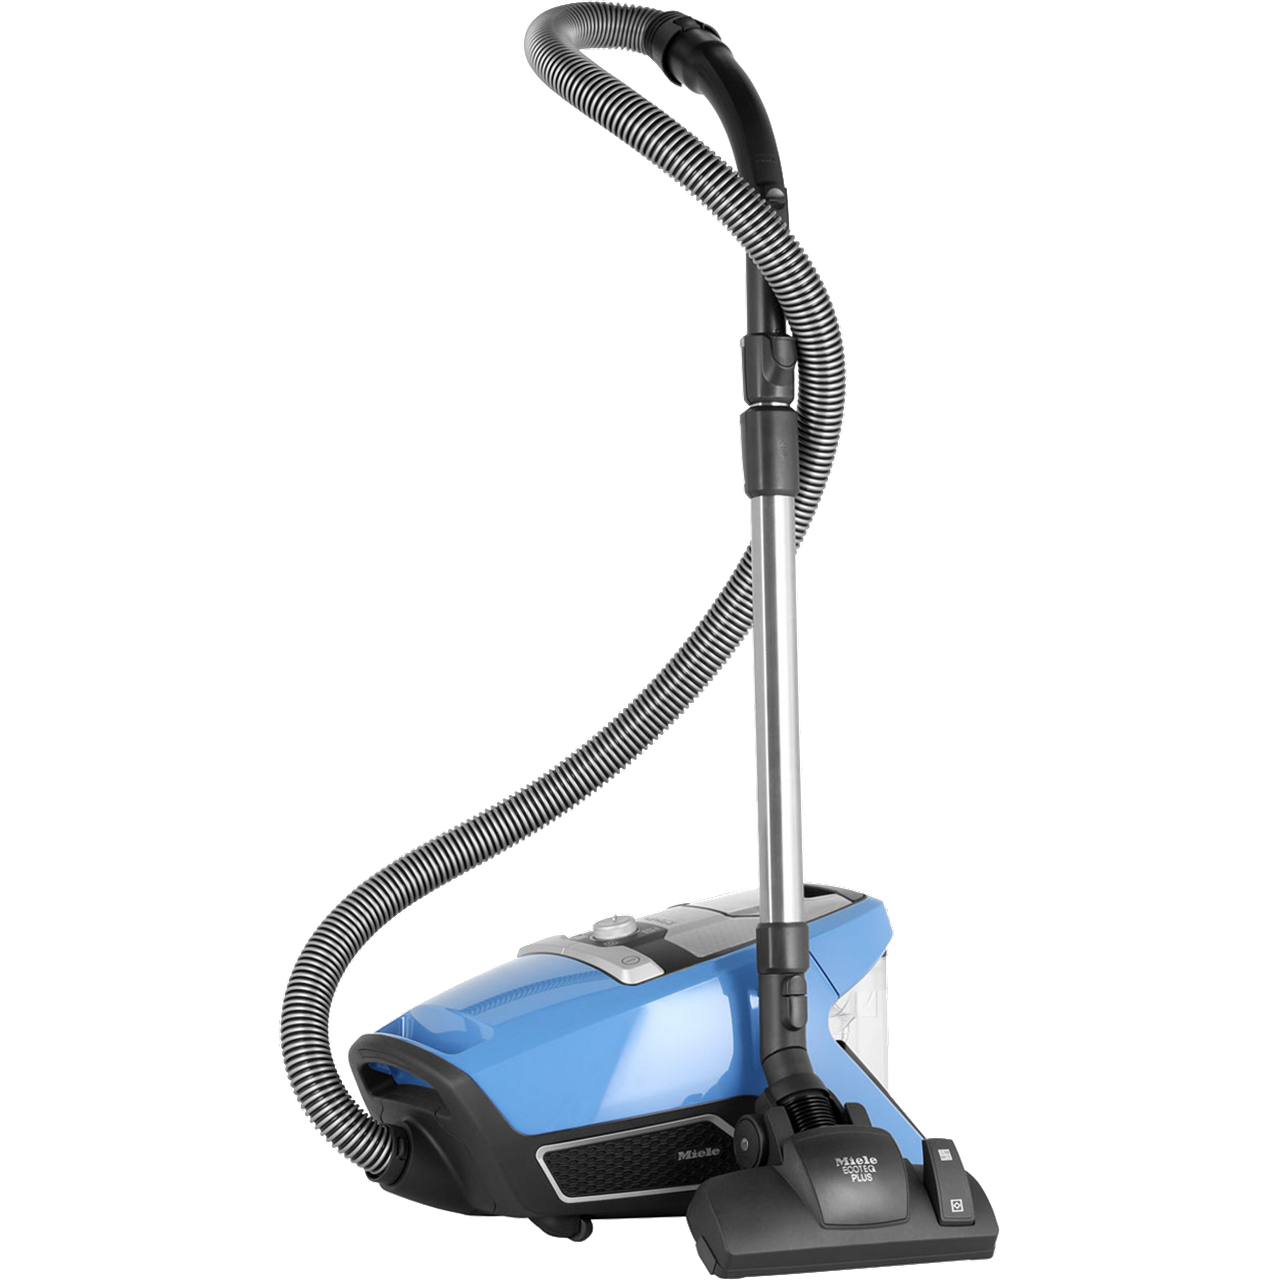 Miele Blizzard CX1 PowerLine Cylinder Vacuum Cleaner Review